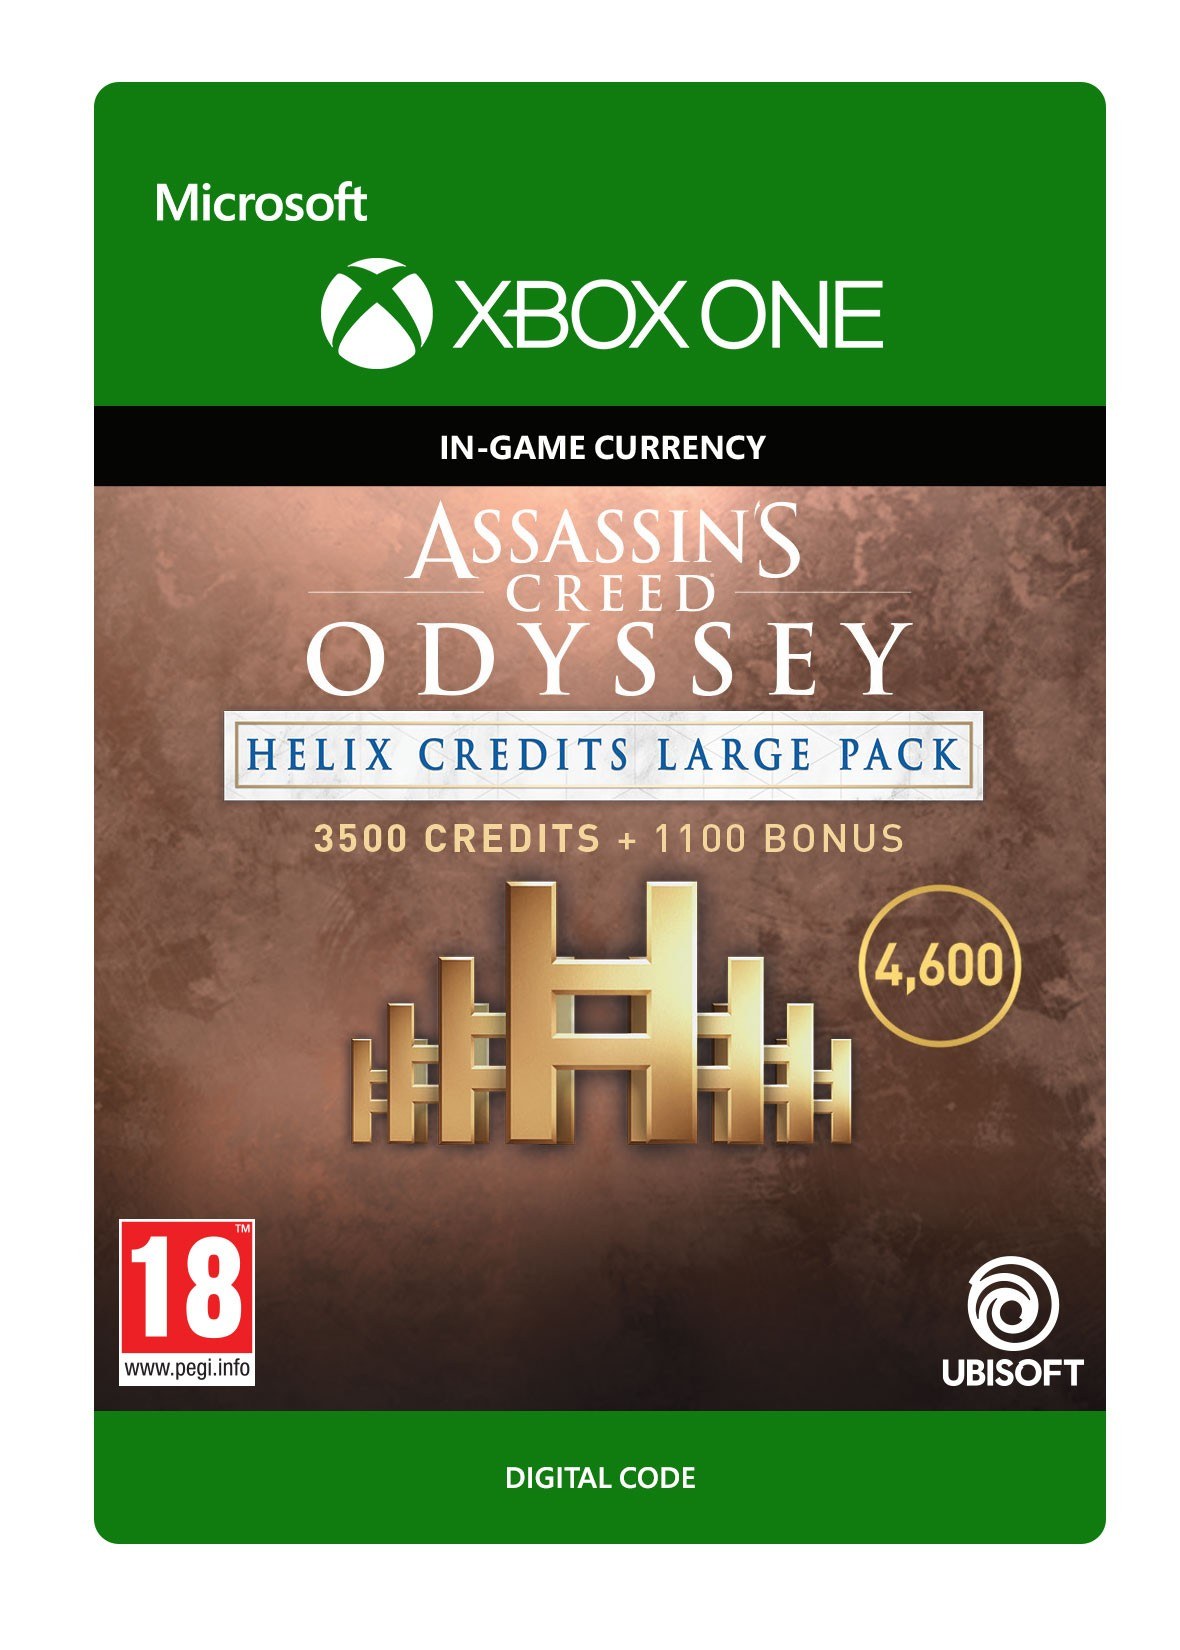 Assassin's Creed Odyssey Helix Credits Large Pack von Ubisoft